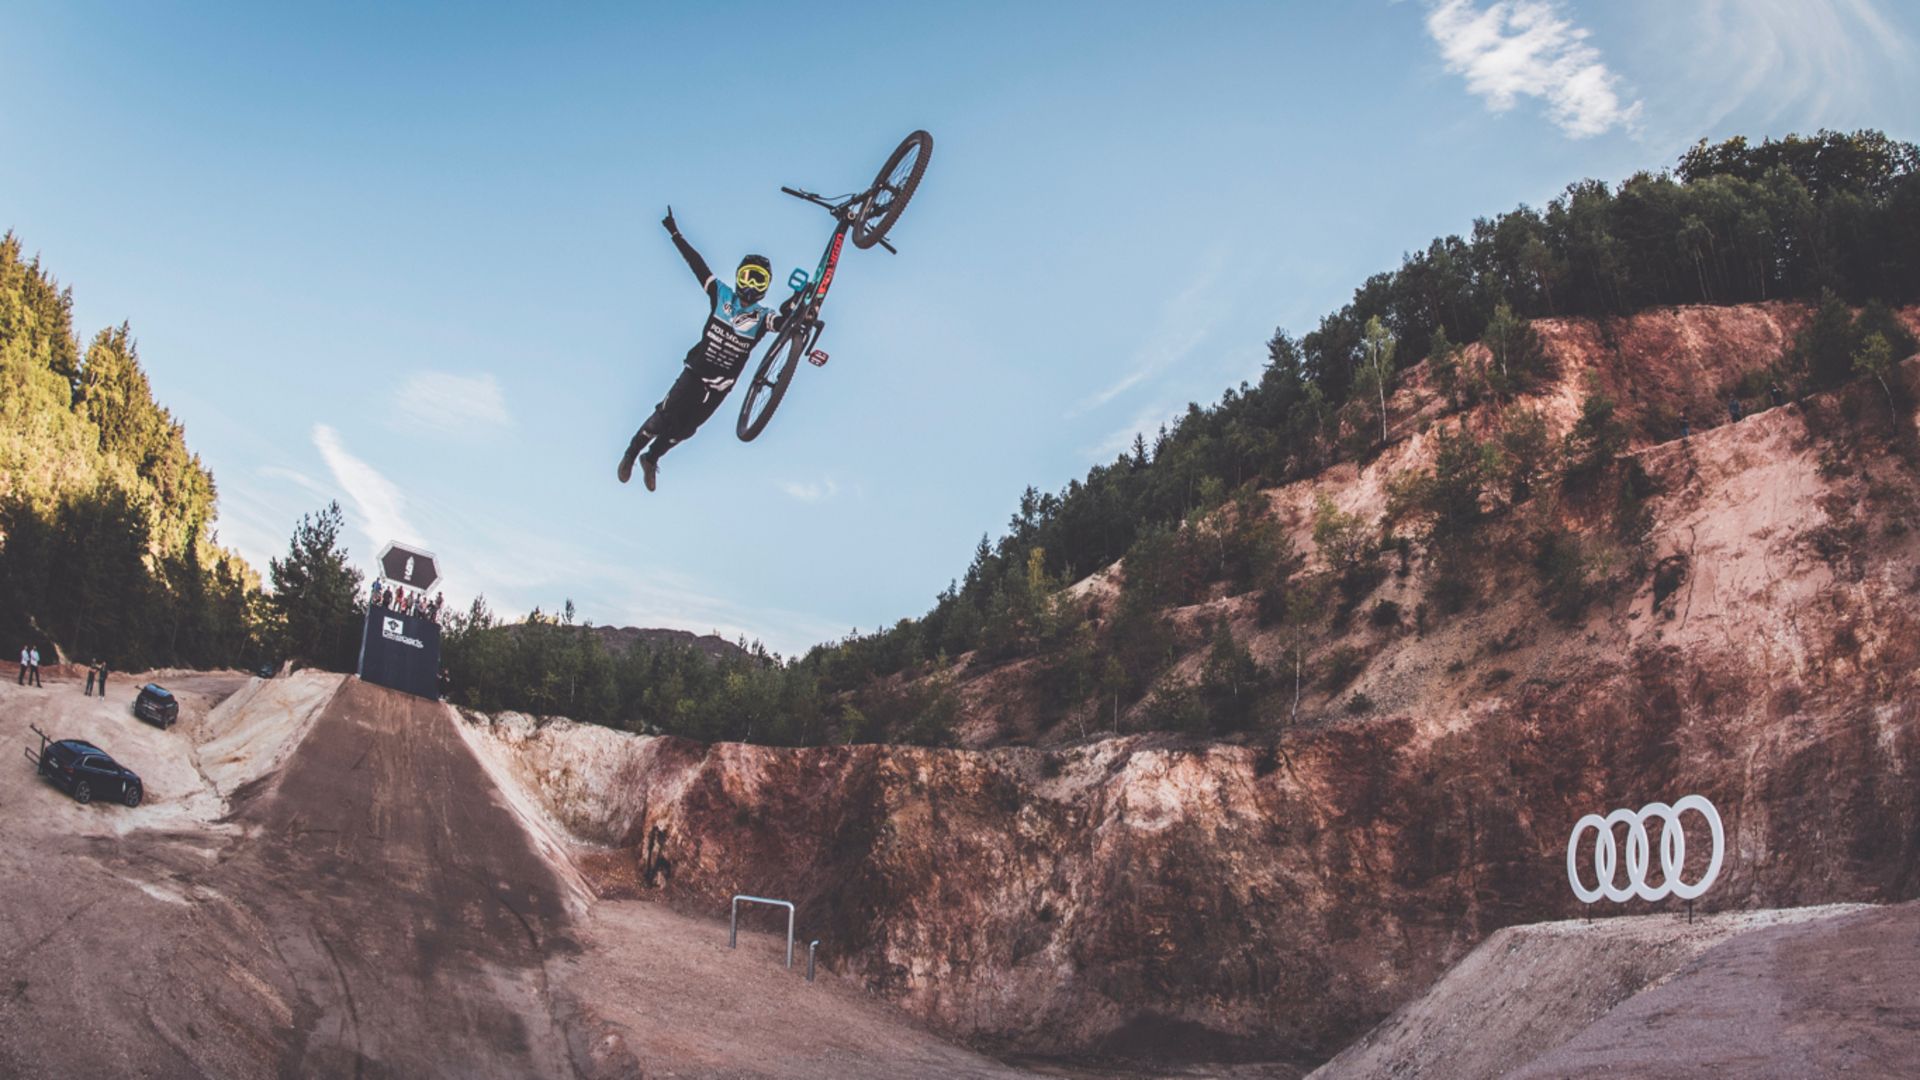 Audi Nines MTB 2019: The second edition of the Audi Nines mountain biking event is just around the corner!